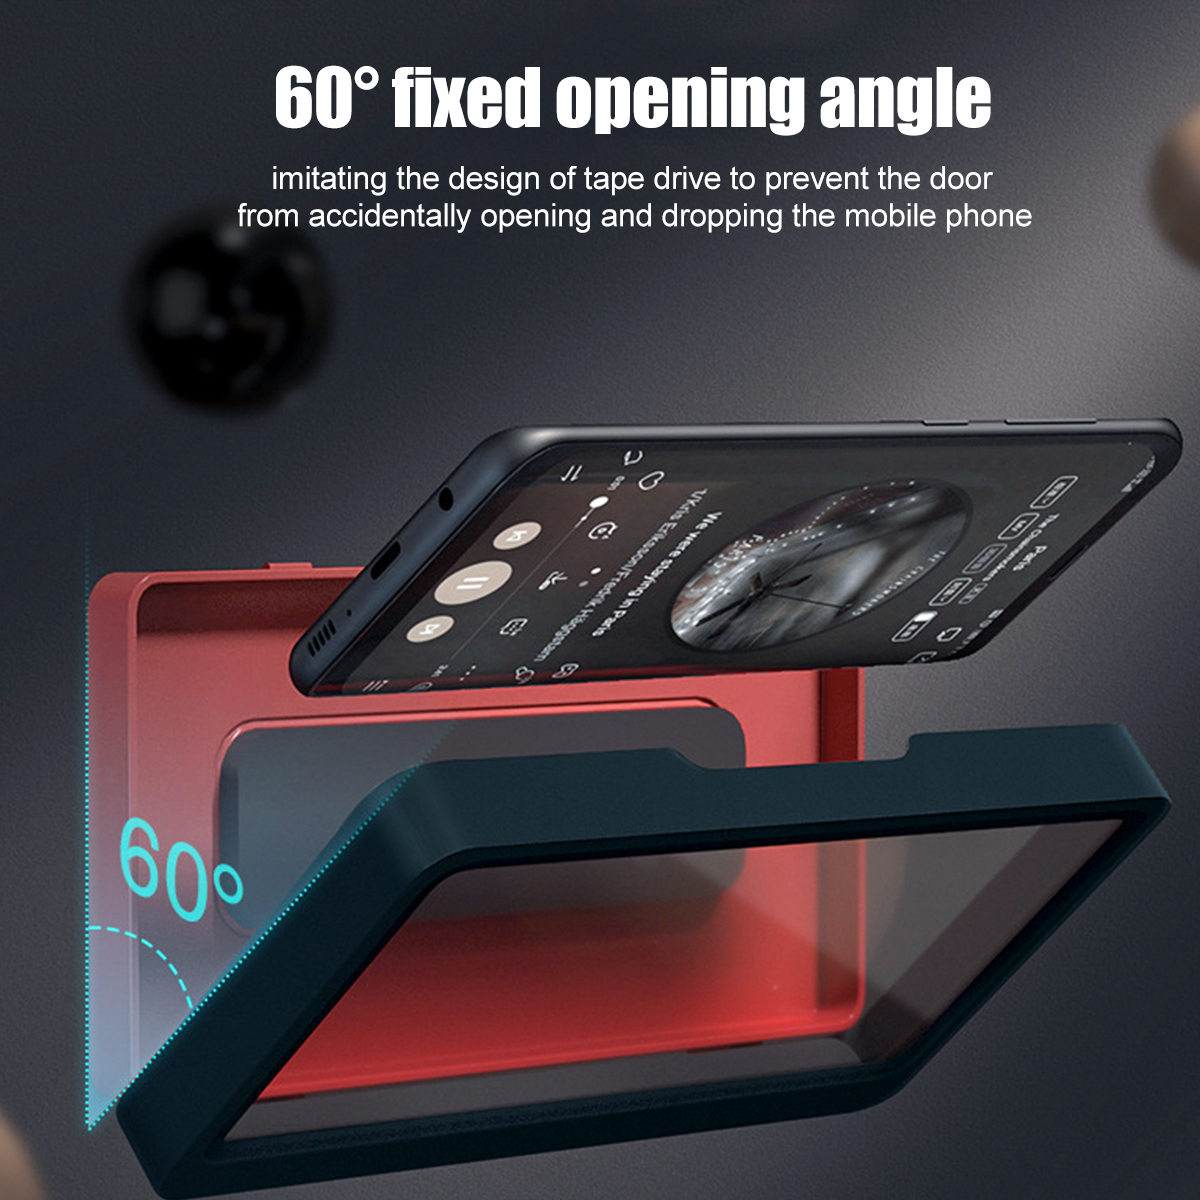 Bathroom-Waterproof-Touch-Screen-Mobile-Cell-Phone-Holder-Case-Wall-Mount-Storage-Box-Under-68-inche-1750862-3